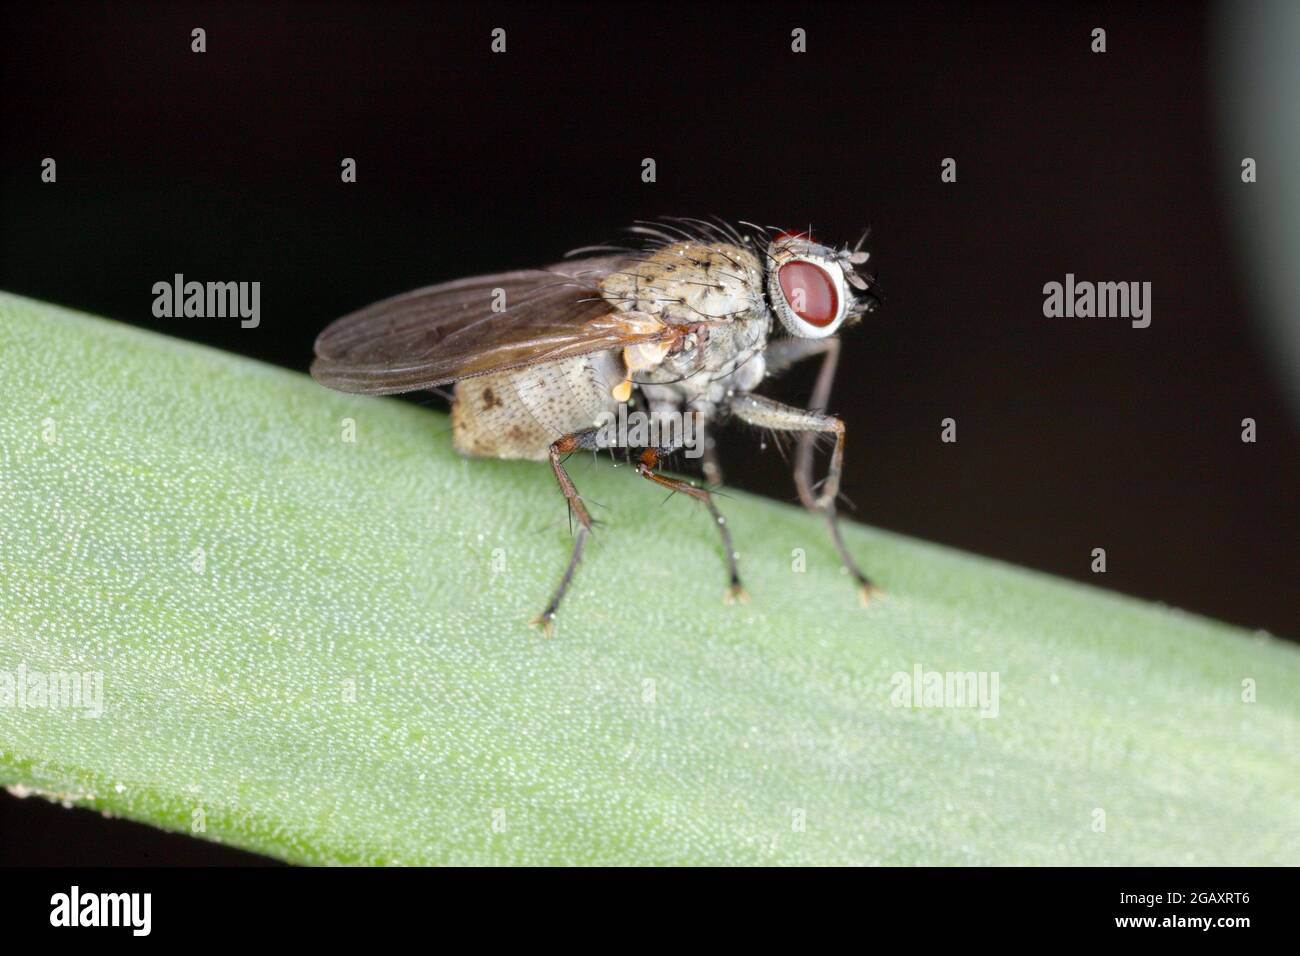 Delia antiqua, commonly known as the onion fly, is a cosmopolitan pest of crops. The larvae or maggots feed on onions, garlic, and other bulbous plant Stock Photo